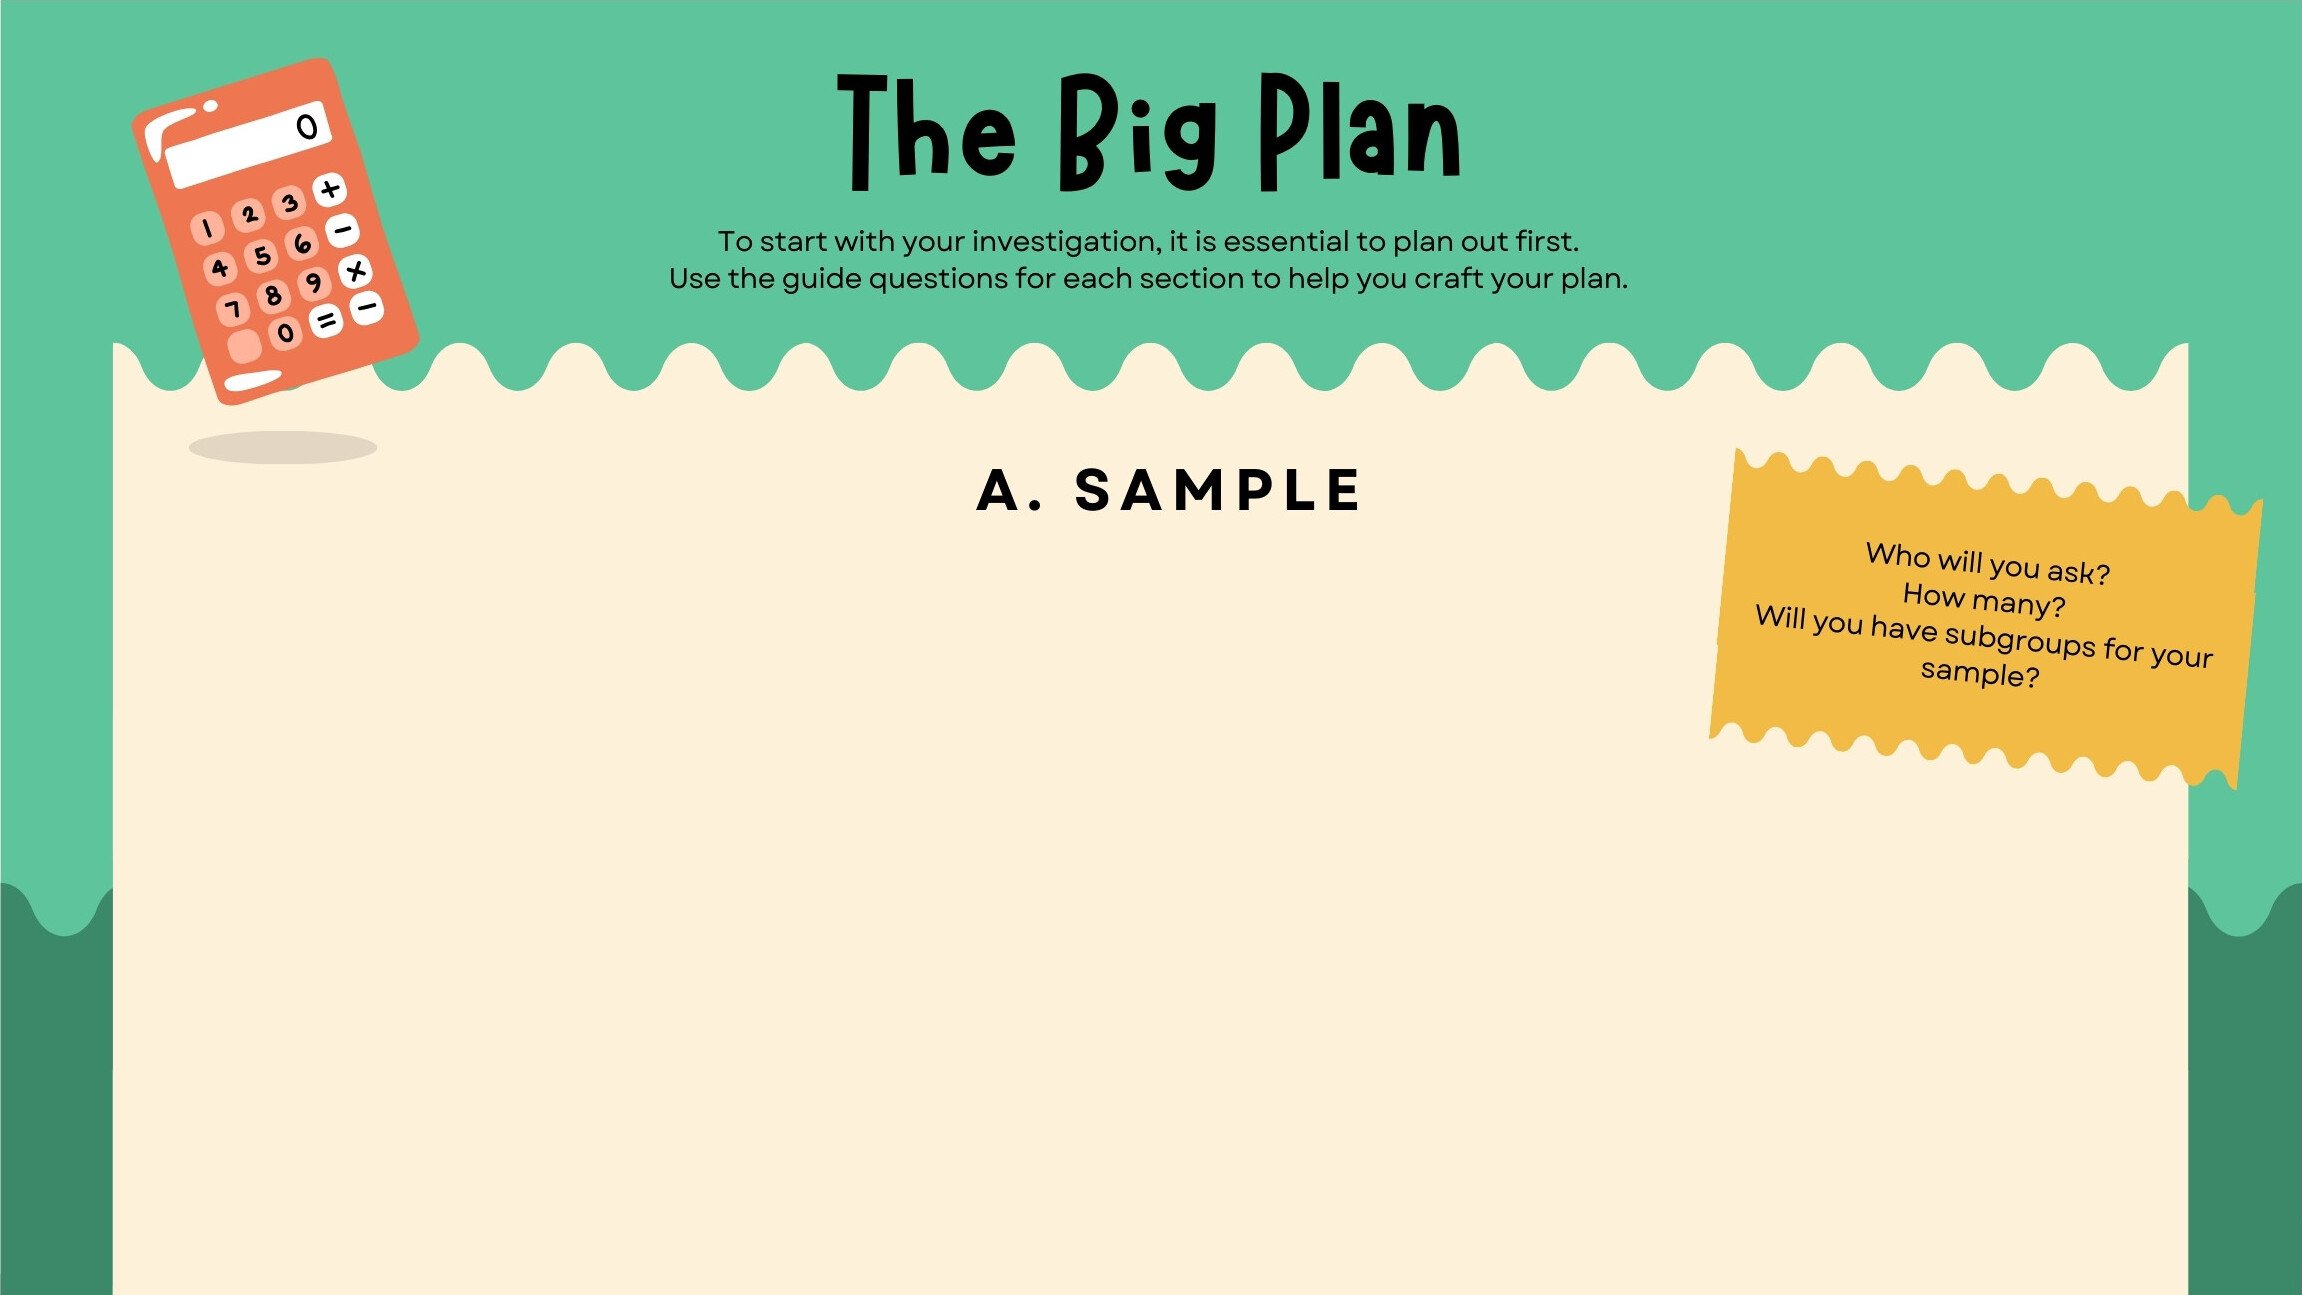 The Big Plan: Research and Sampling Techniques Education Whiteboard in Green Cream Yellow Nostalgic Handdrawn Style